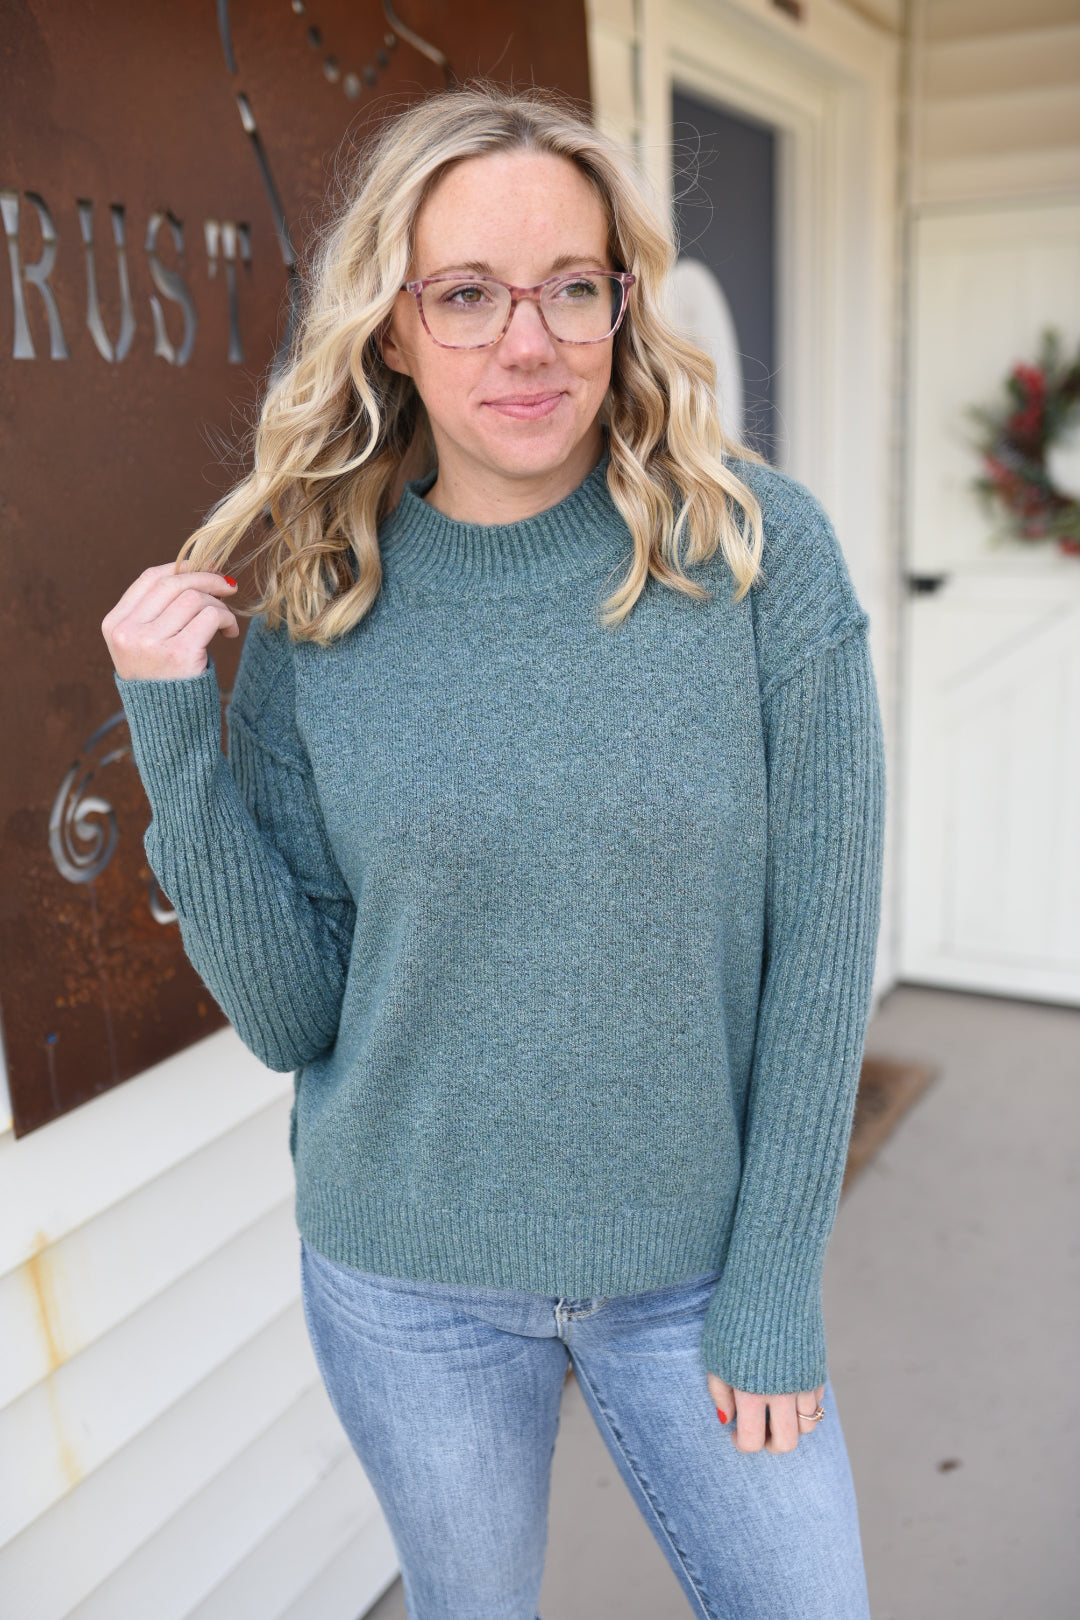 The Perfect Mock Turtleneck Sweater